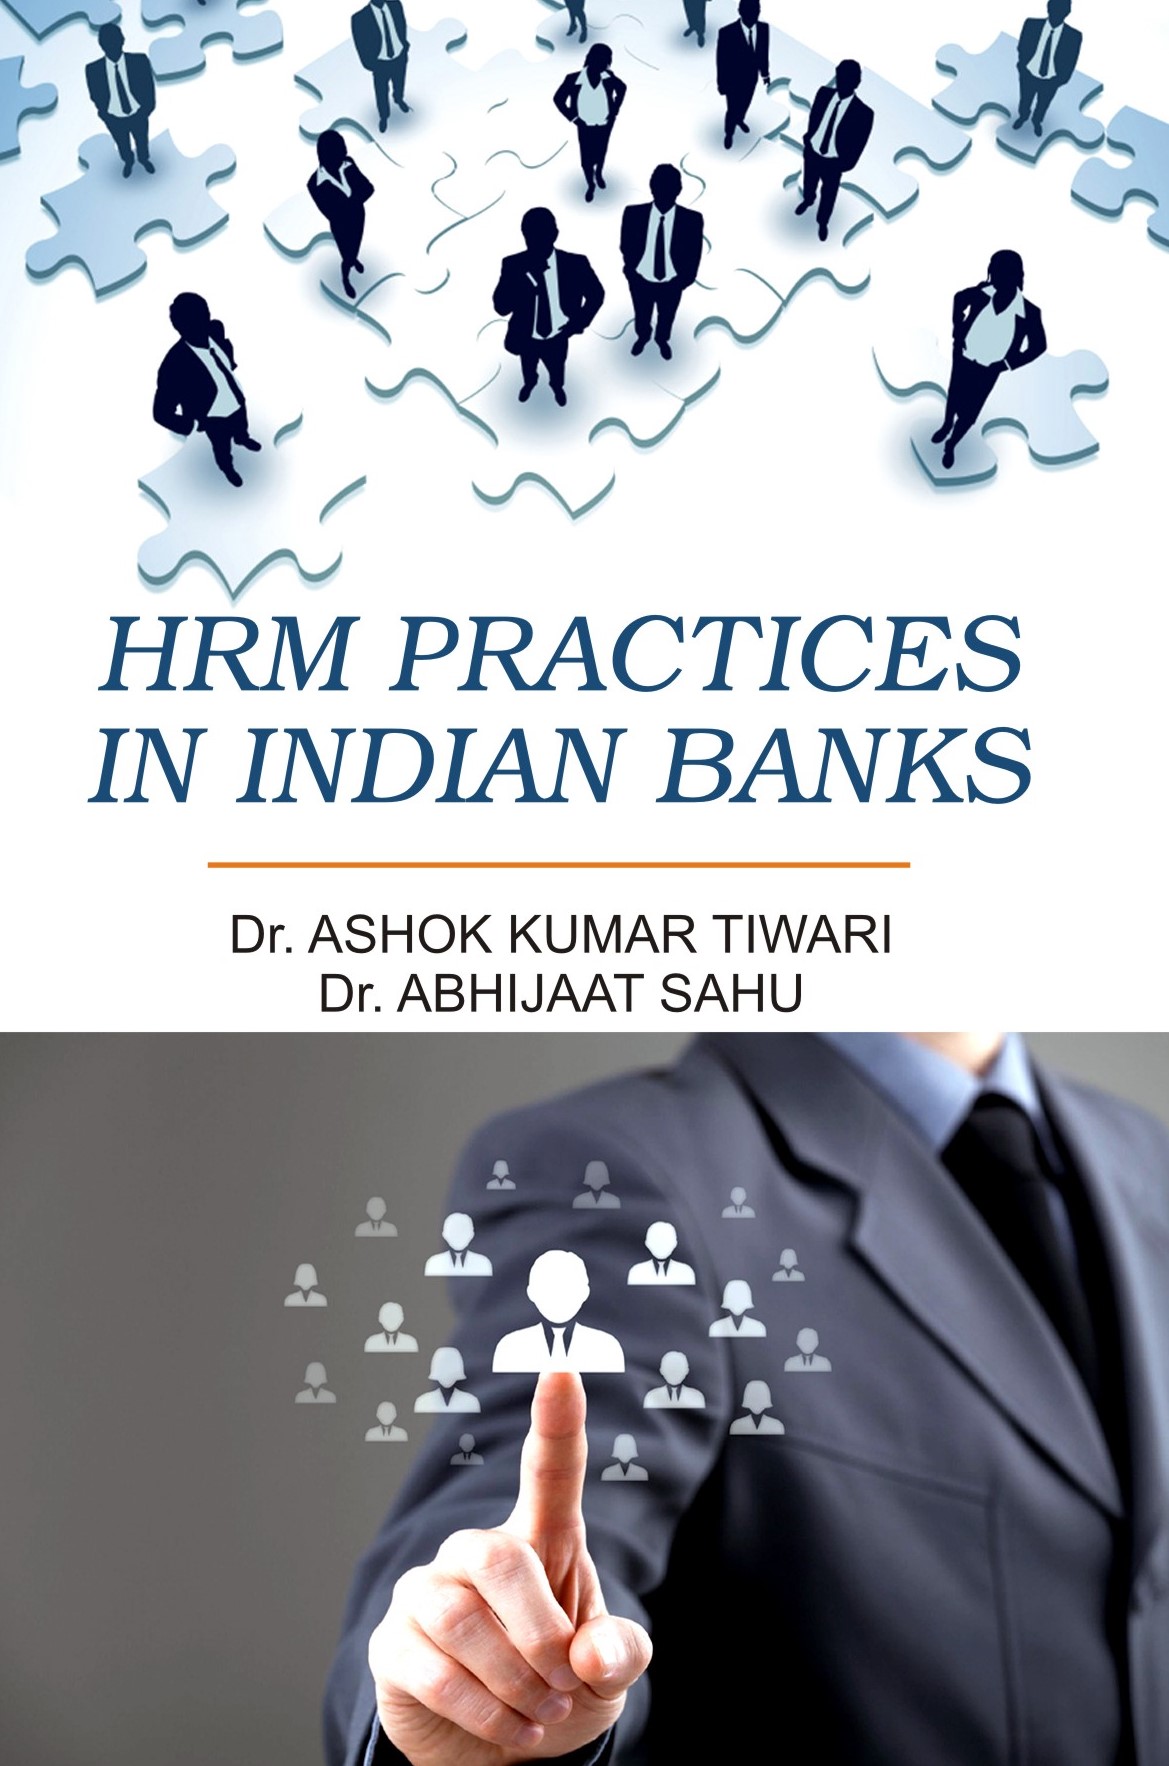 HRM Practices in Indian Banks